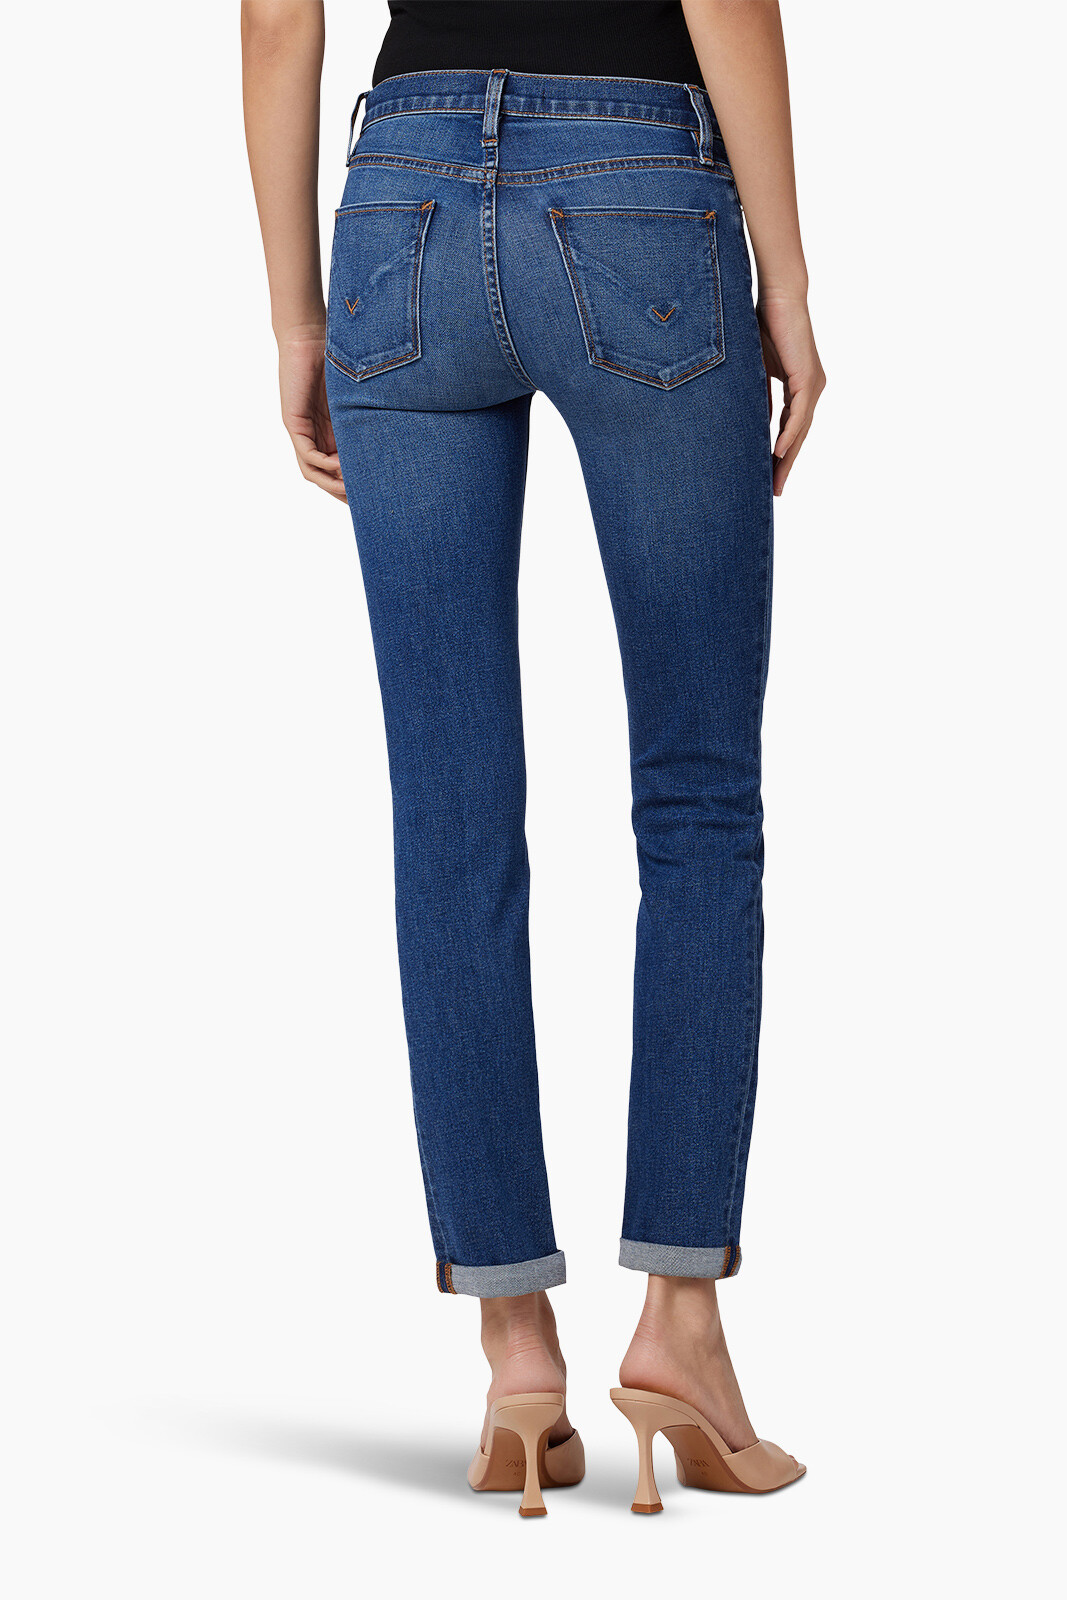 Nico Midrise Straight Jean with Rolled Hem